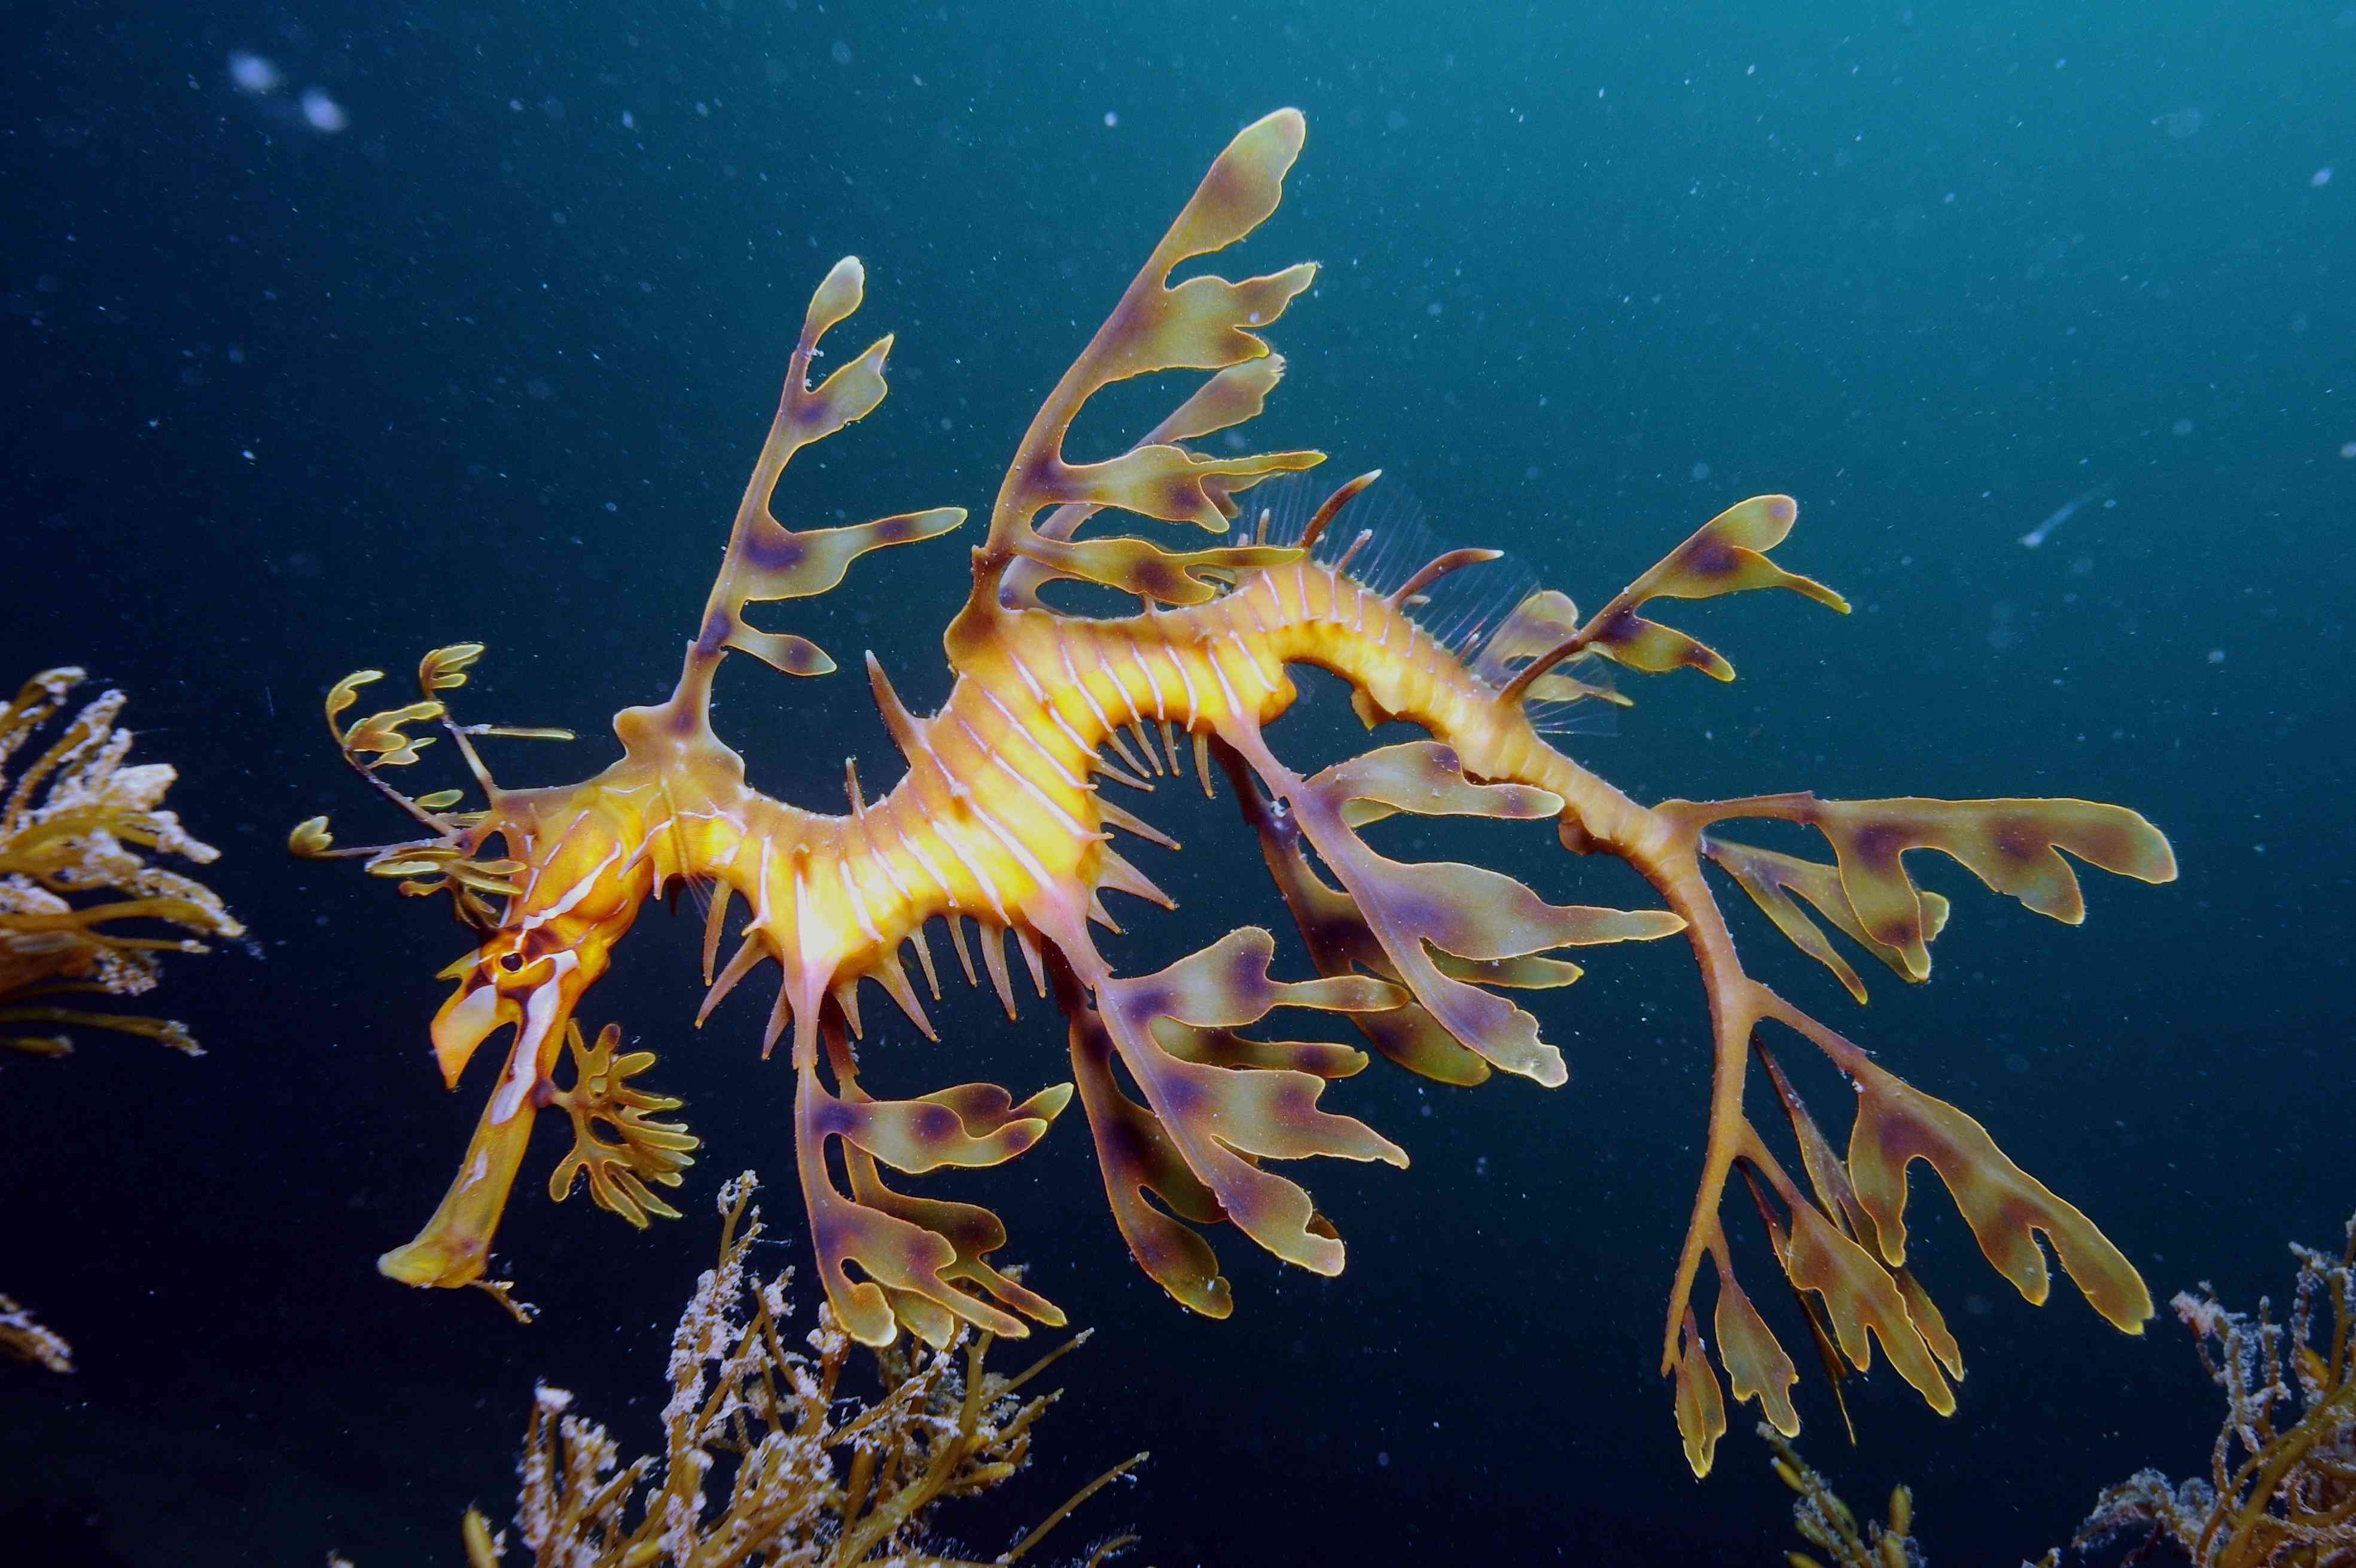 Though they may look like strands of seaweed, the leafy seadragon is a fish related to the seahorse. Known as 